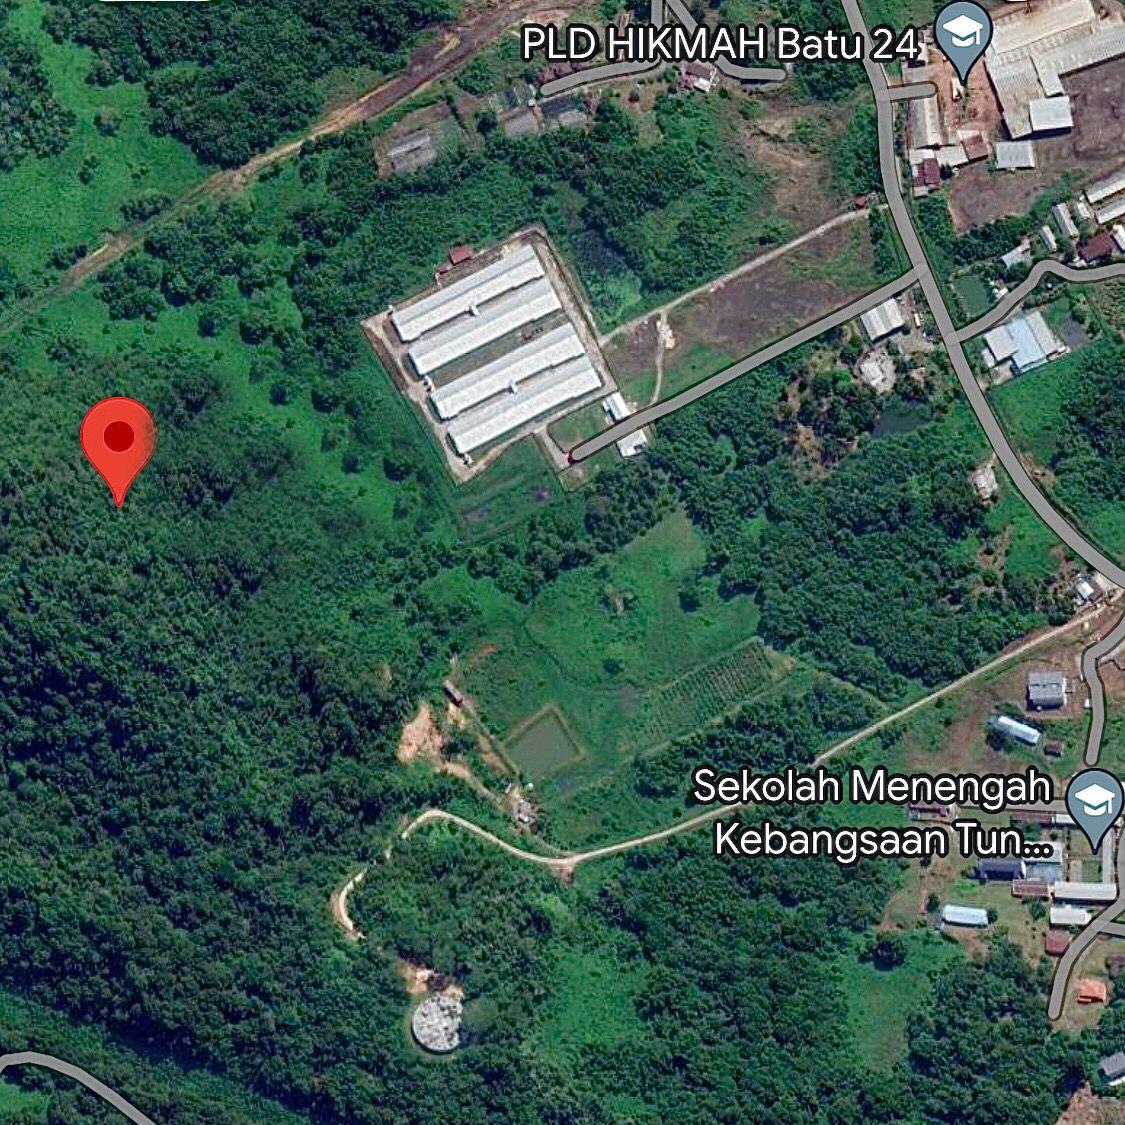 Mixed Zone Land For Sale! Located at Batu 24th Mile,